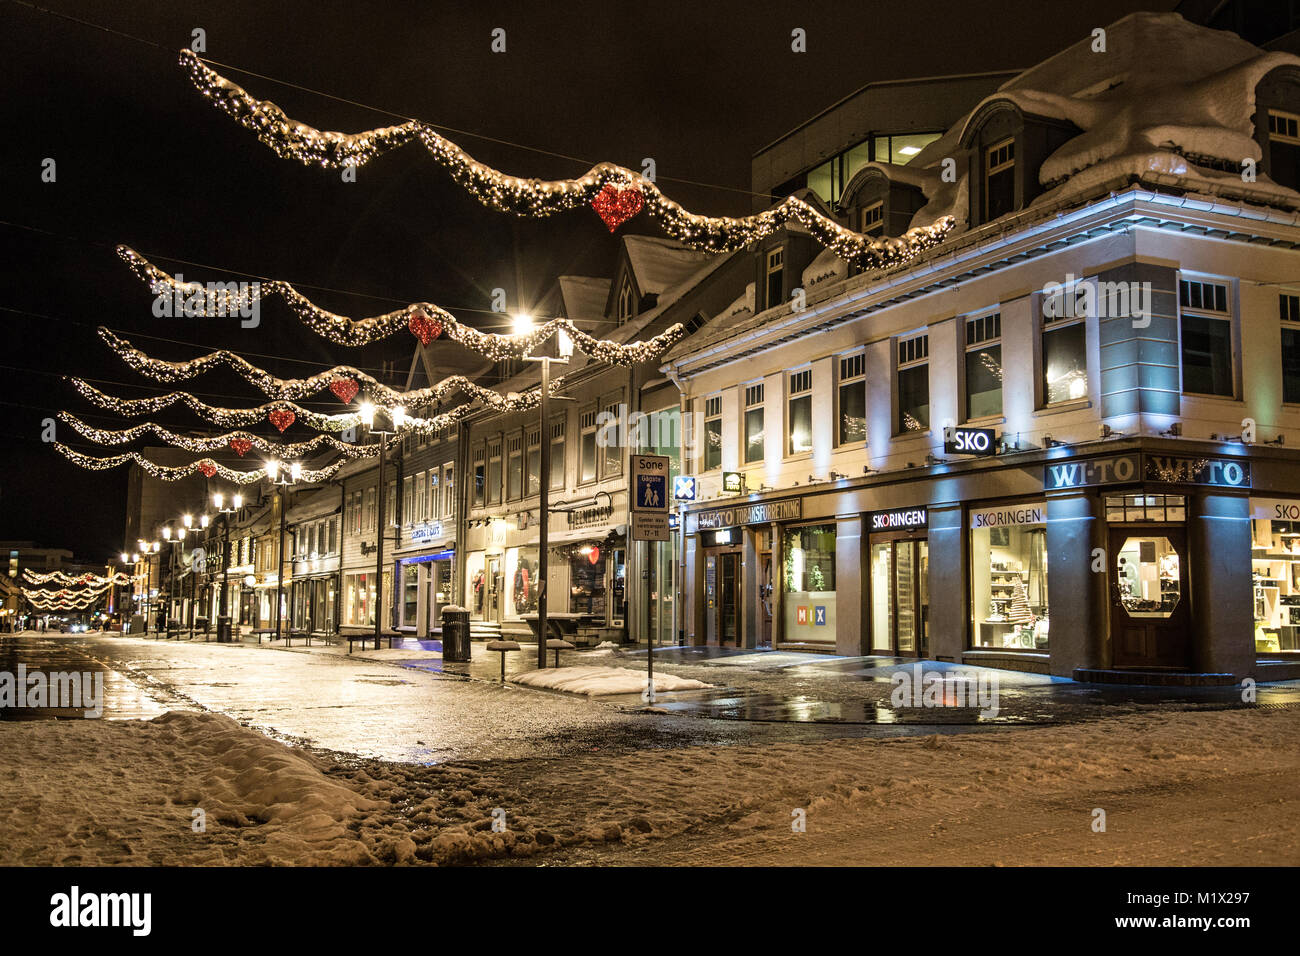 A view of the central street of Tromsø, Storgata, at polar night in winter, all lit up, with decorations for Christmas. Stock Photo